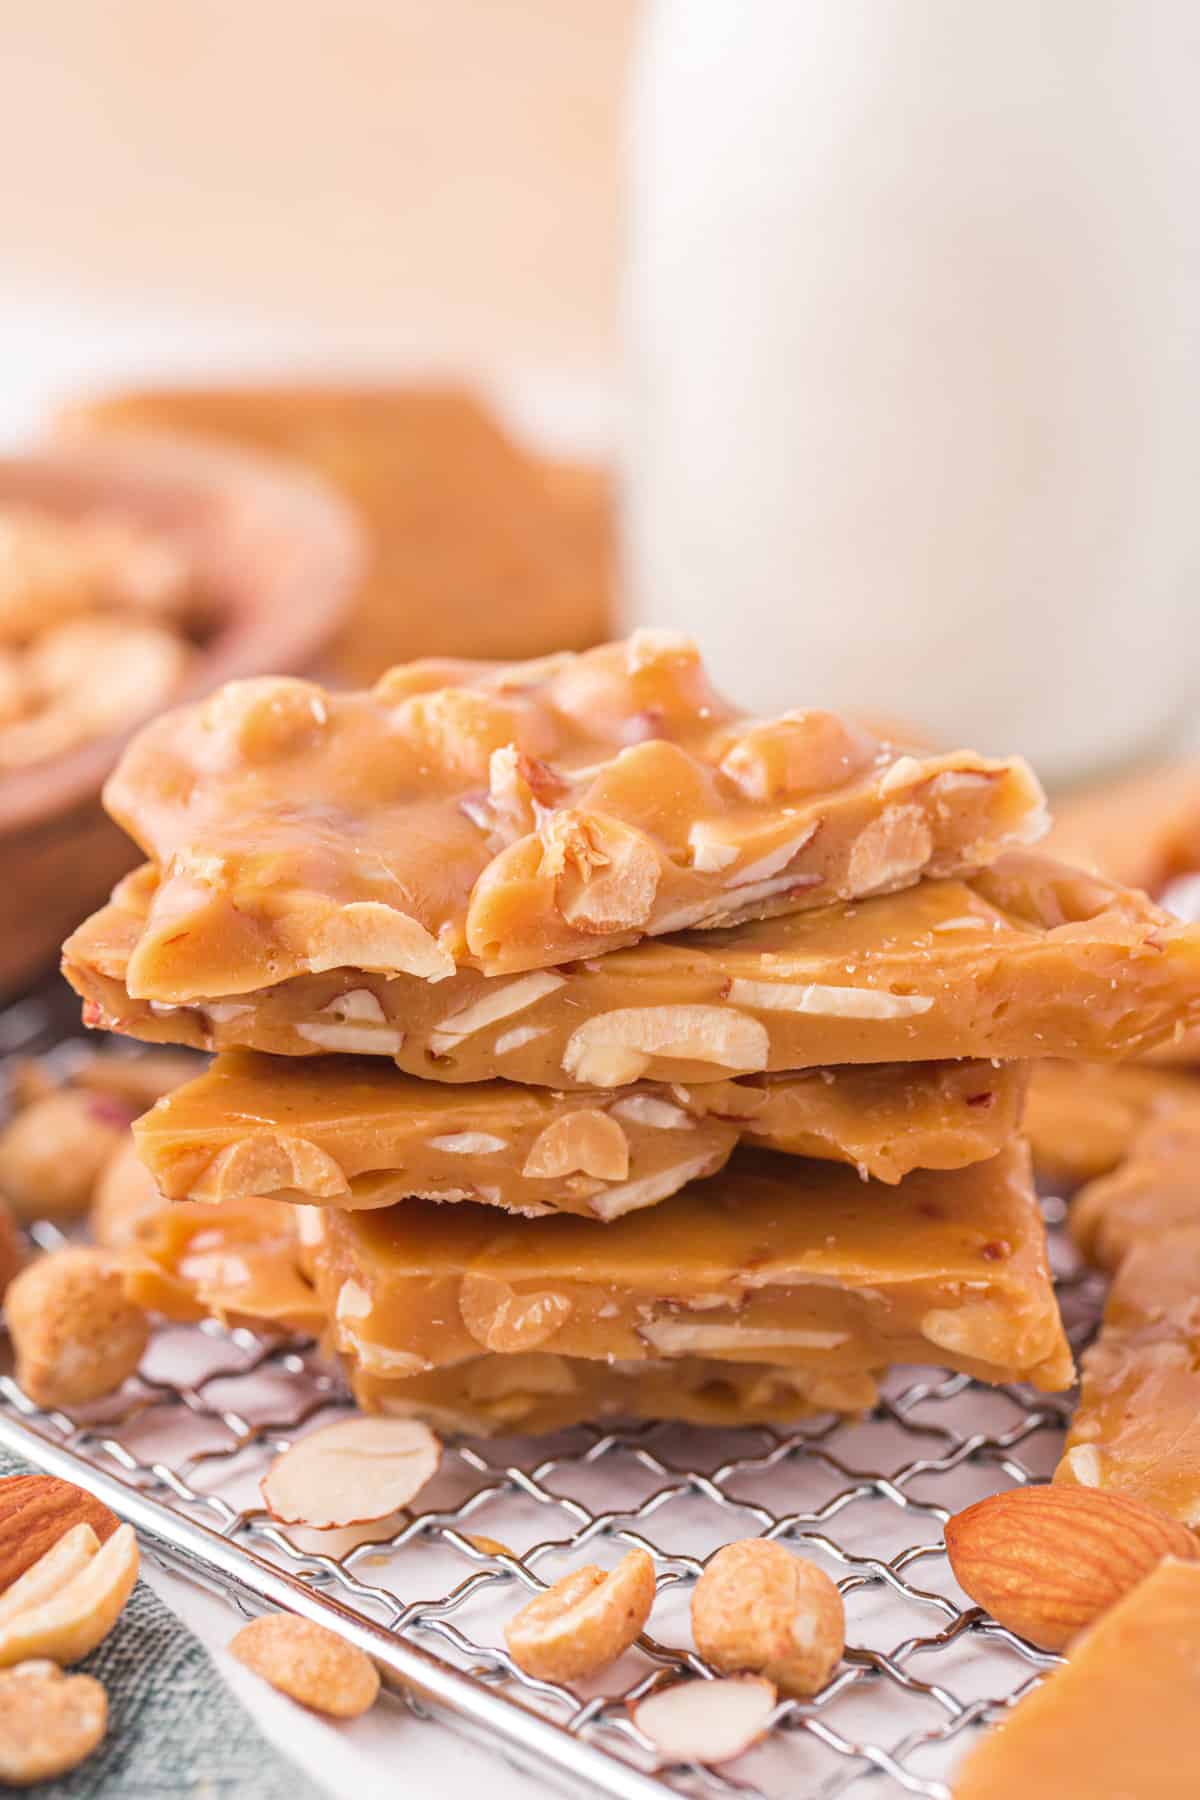 Nut brittle recipe with almonds and peanuts. Roughly broken pieces are stacked in a pile on metal rack.